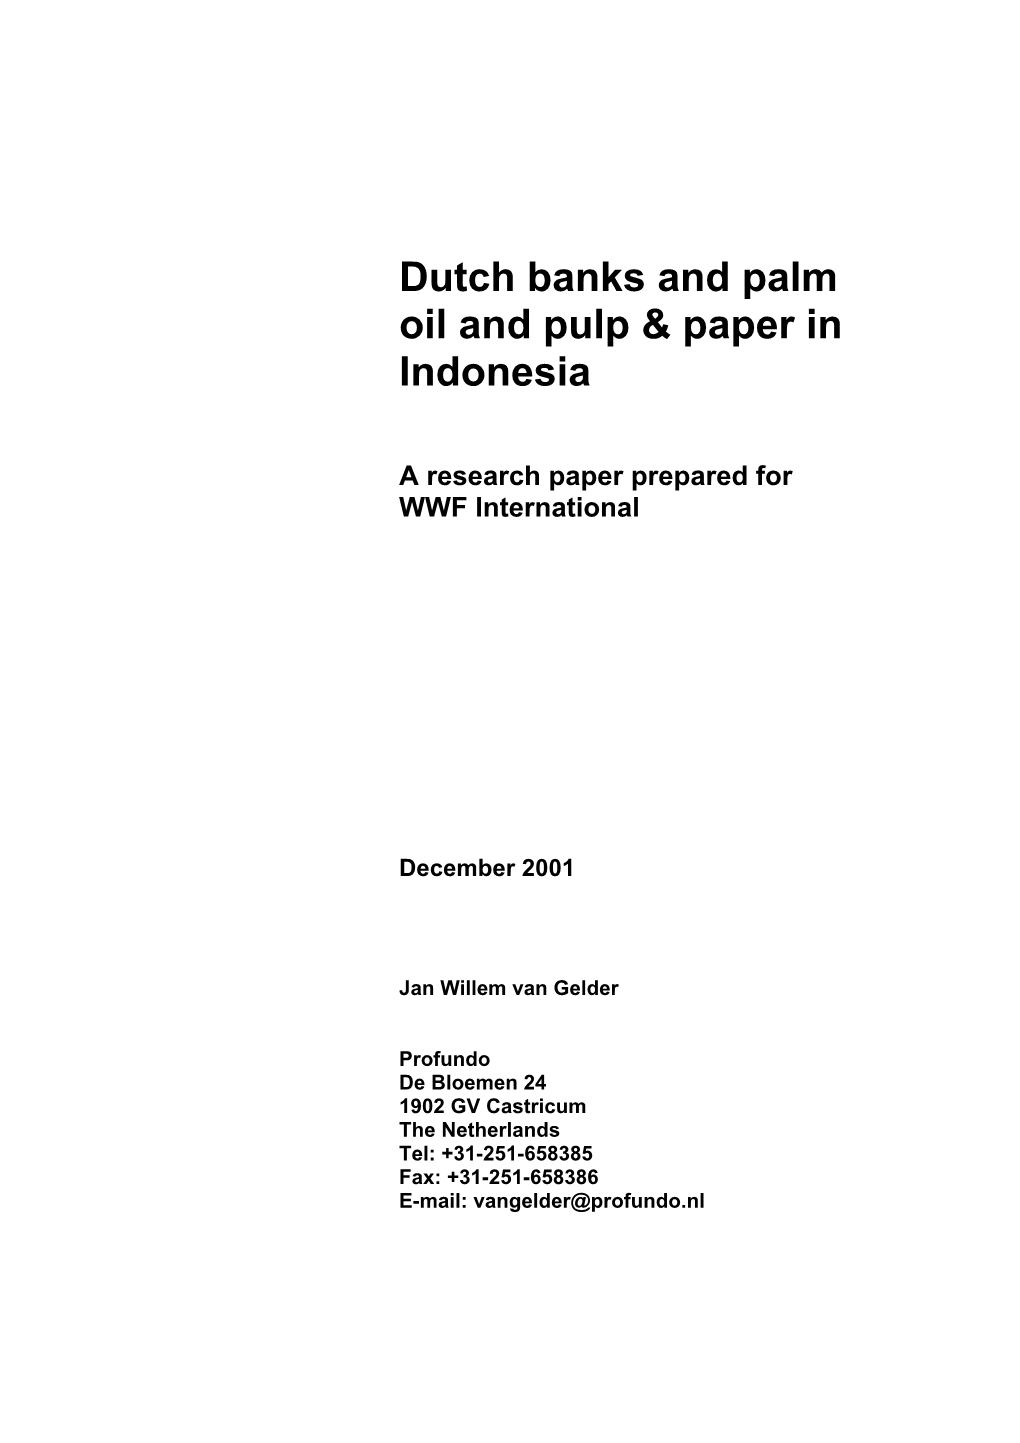 Dutch Banks and Palm Oil and Pulp & Paper in Indonesia